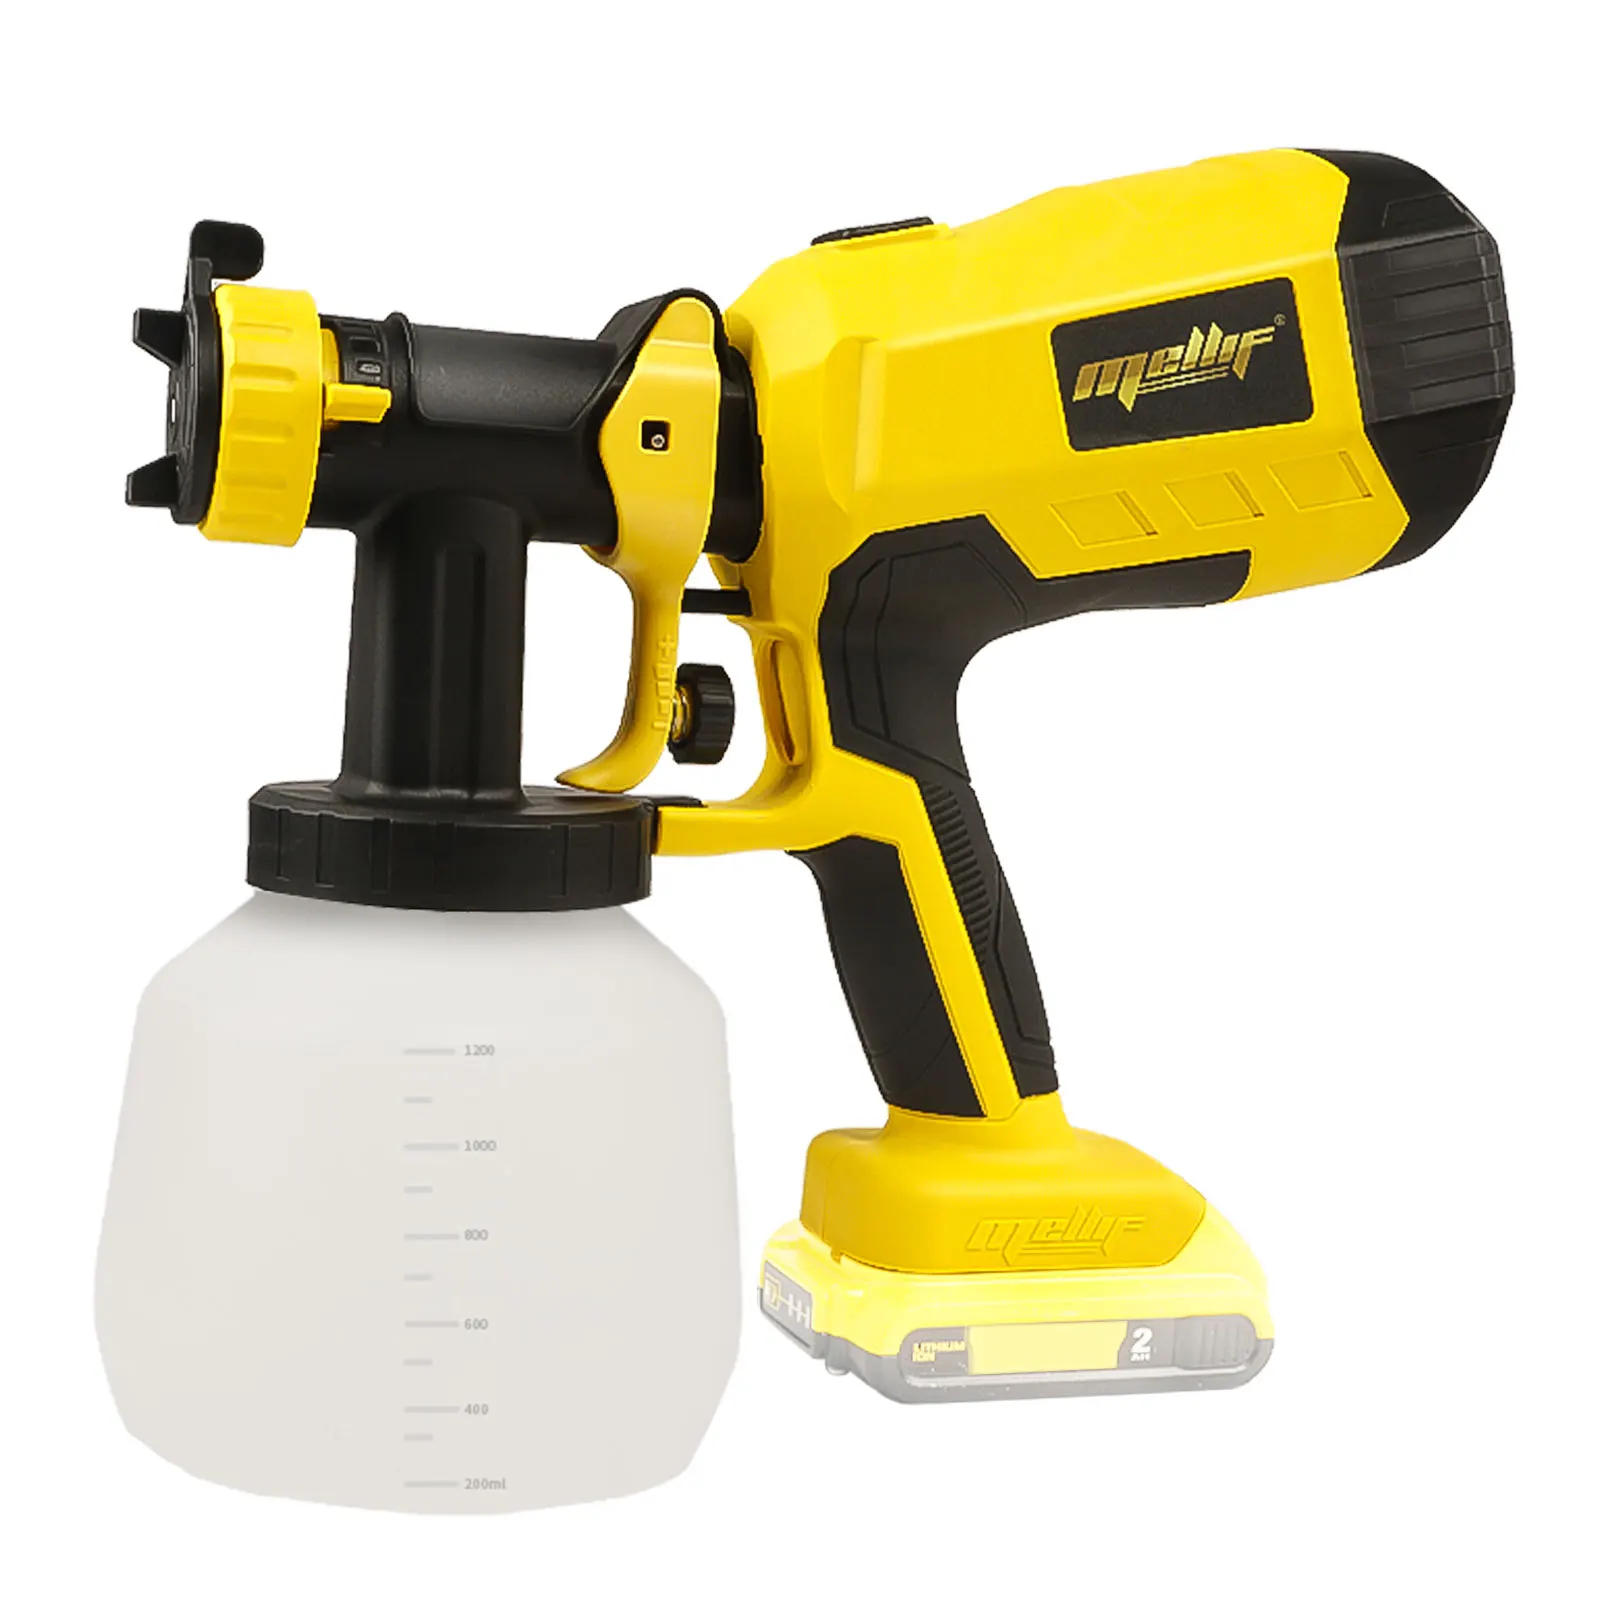 Spray Gun for dewalt 18v 20v max battery Cordless Paint Sprayer Gun with 3 Spray Patterns for Painting Ceiling Fence(NO Battery) enlarge